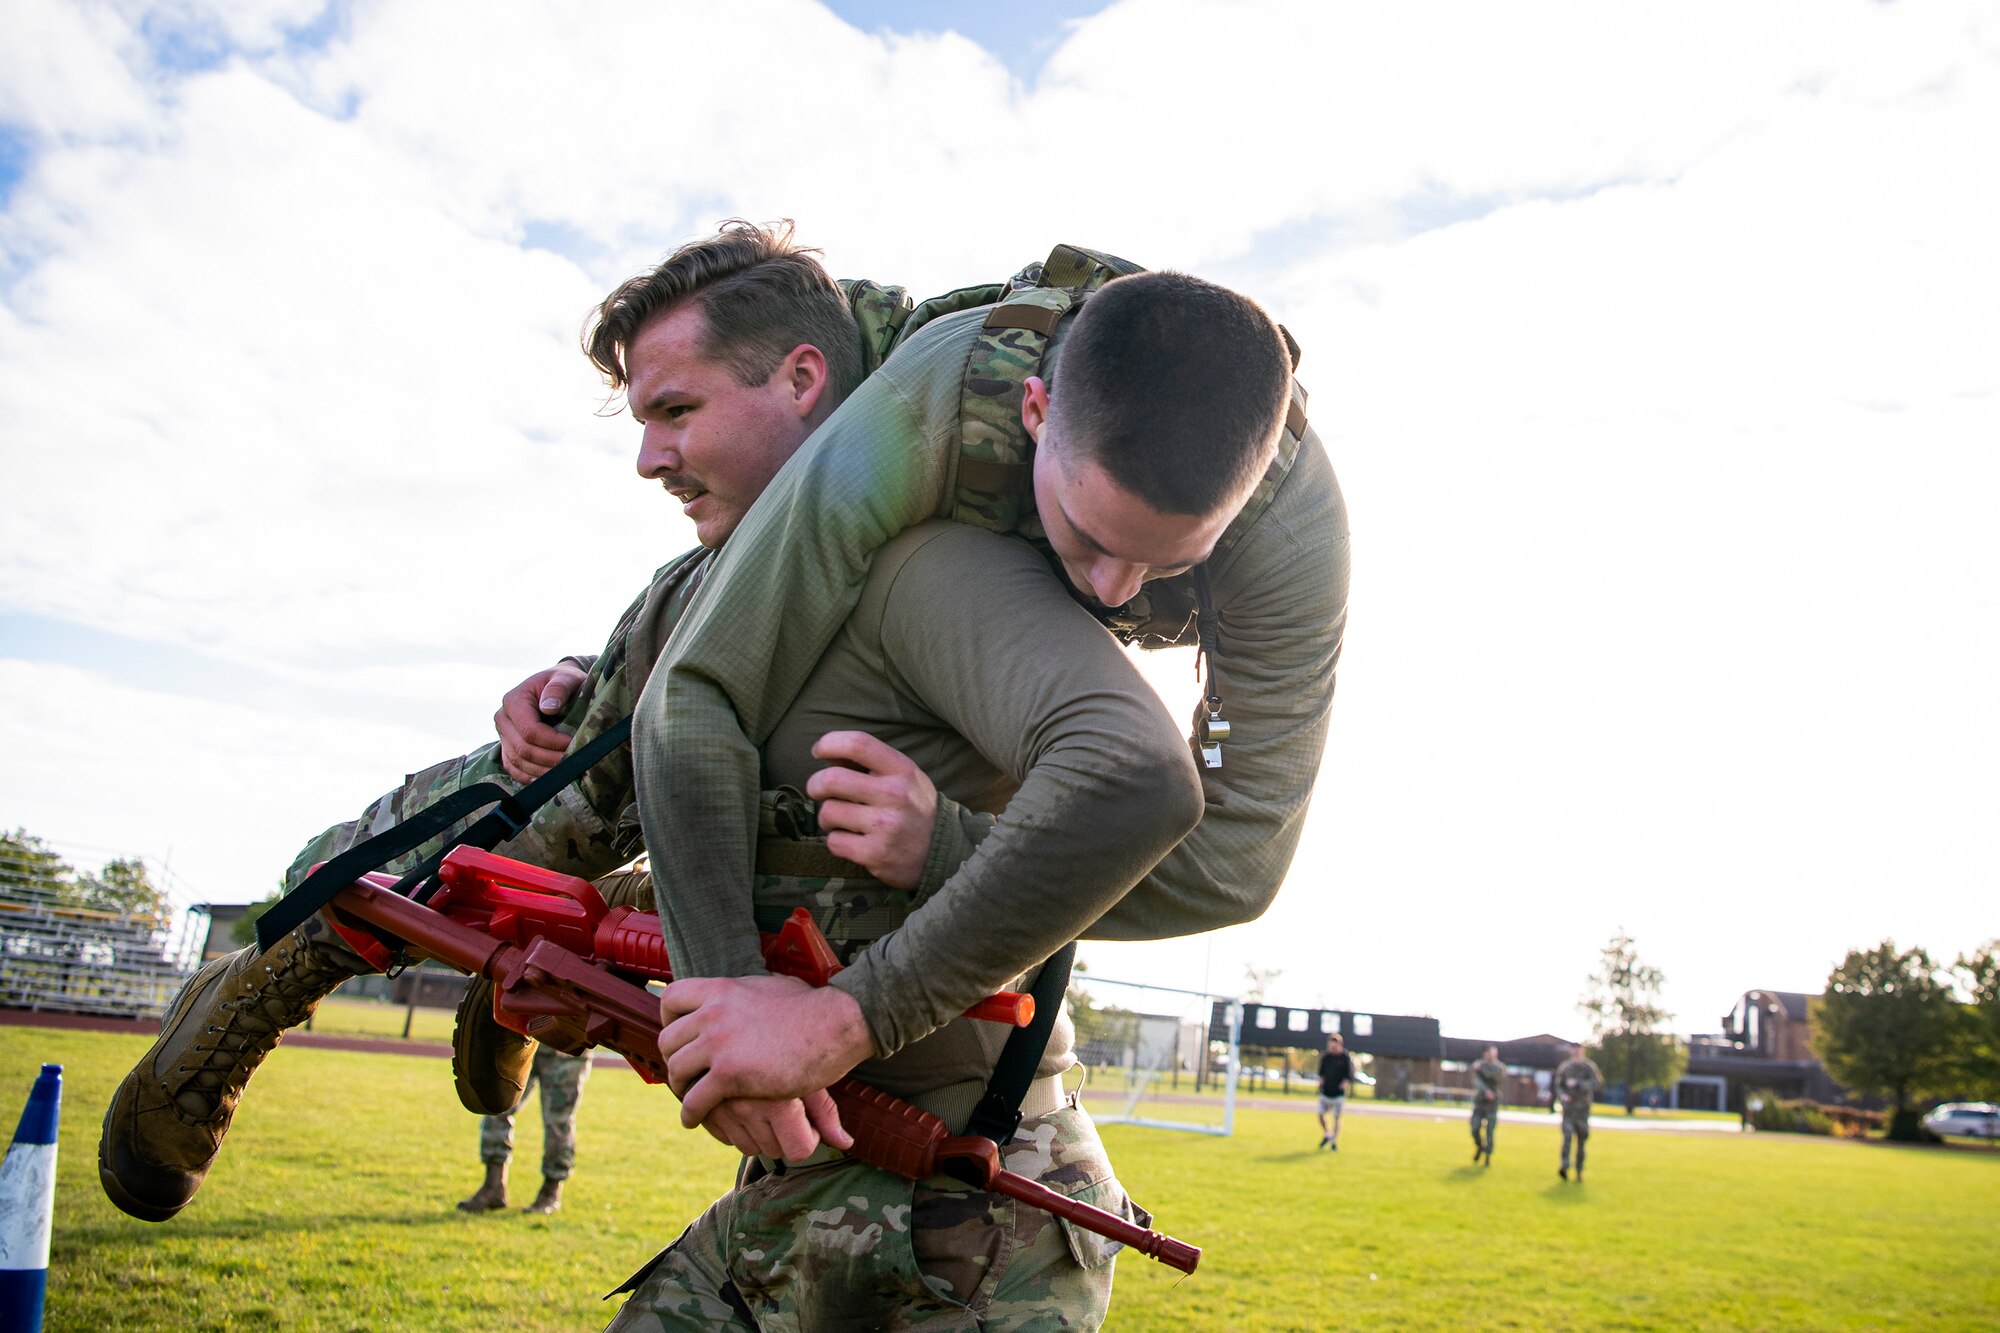 Airman 1st Class Garrett Allen, left, 423rd Security Forces Squadron patrolman, carries Airman 1st Class Aidan Holt, 423rd SFS installation patrolman, as part of a defender challenge at RAF Alconbury, England, Oct. 13, 2021. The challenge was part of National Police Week where defenders paid homage to those who have served as police officers and to honor those that lost their lives in the line of duty. (U.S. Air Force photo by Senior Airman Eugene Oliver)